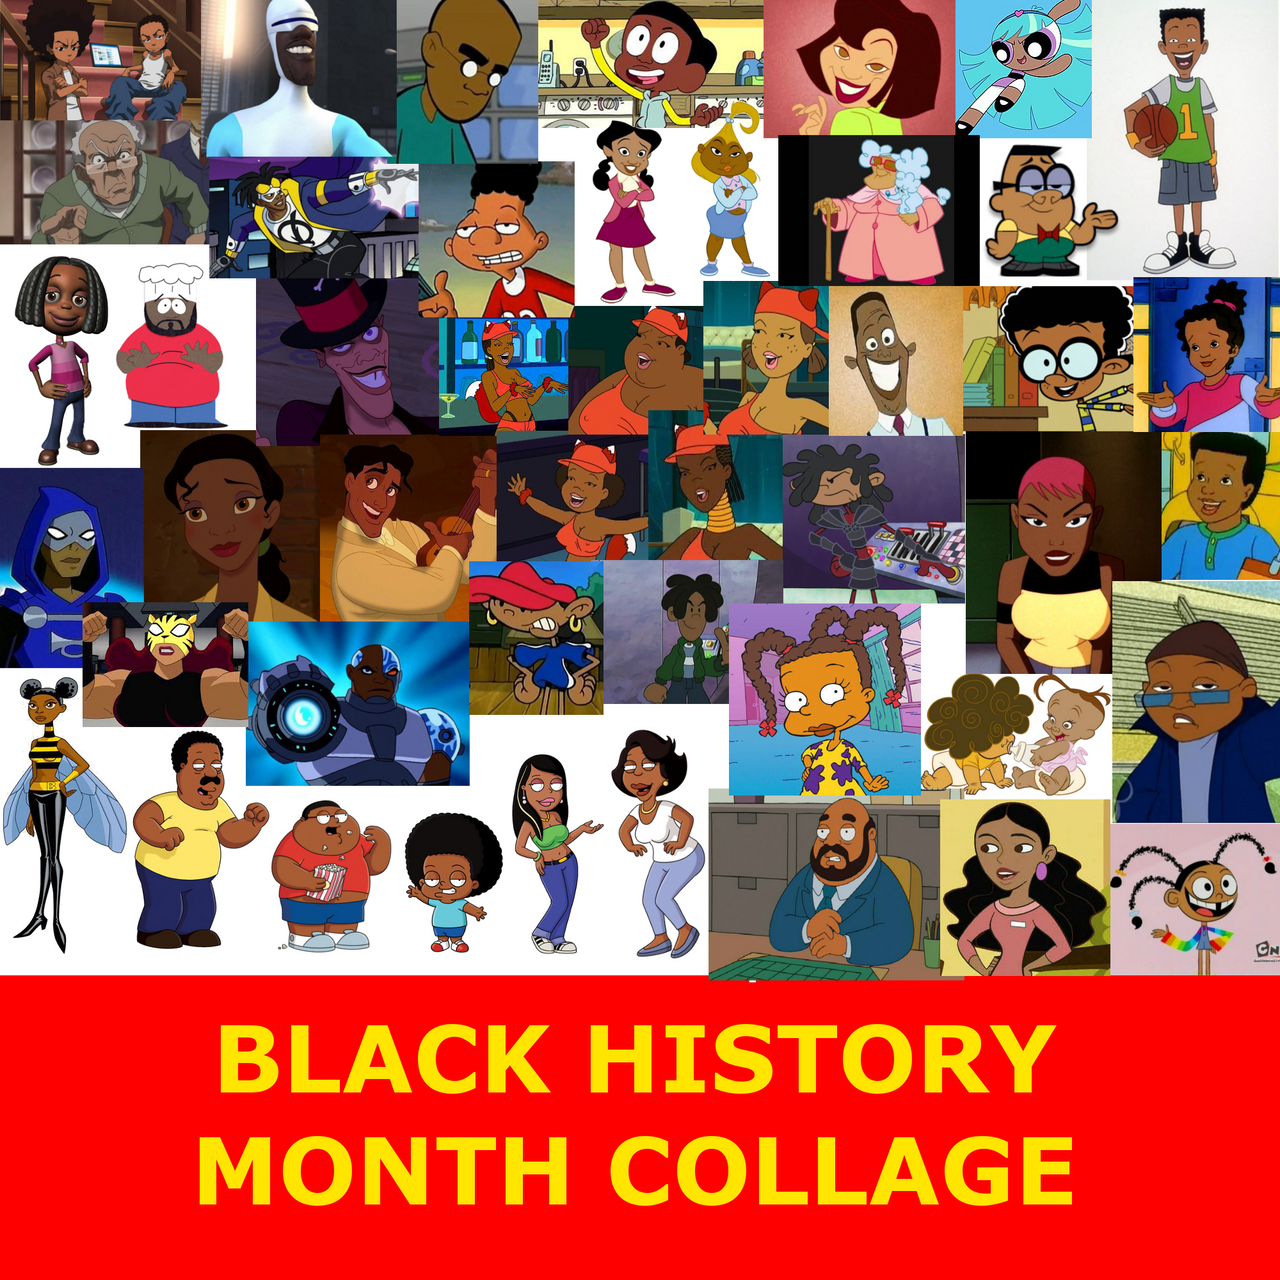 Black History Month Collage by ToonGamer23 on DeviantArt